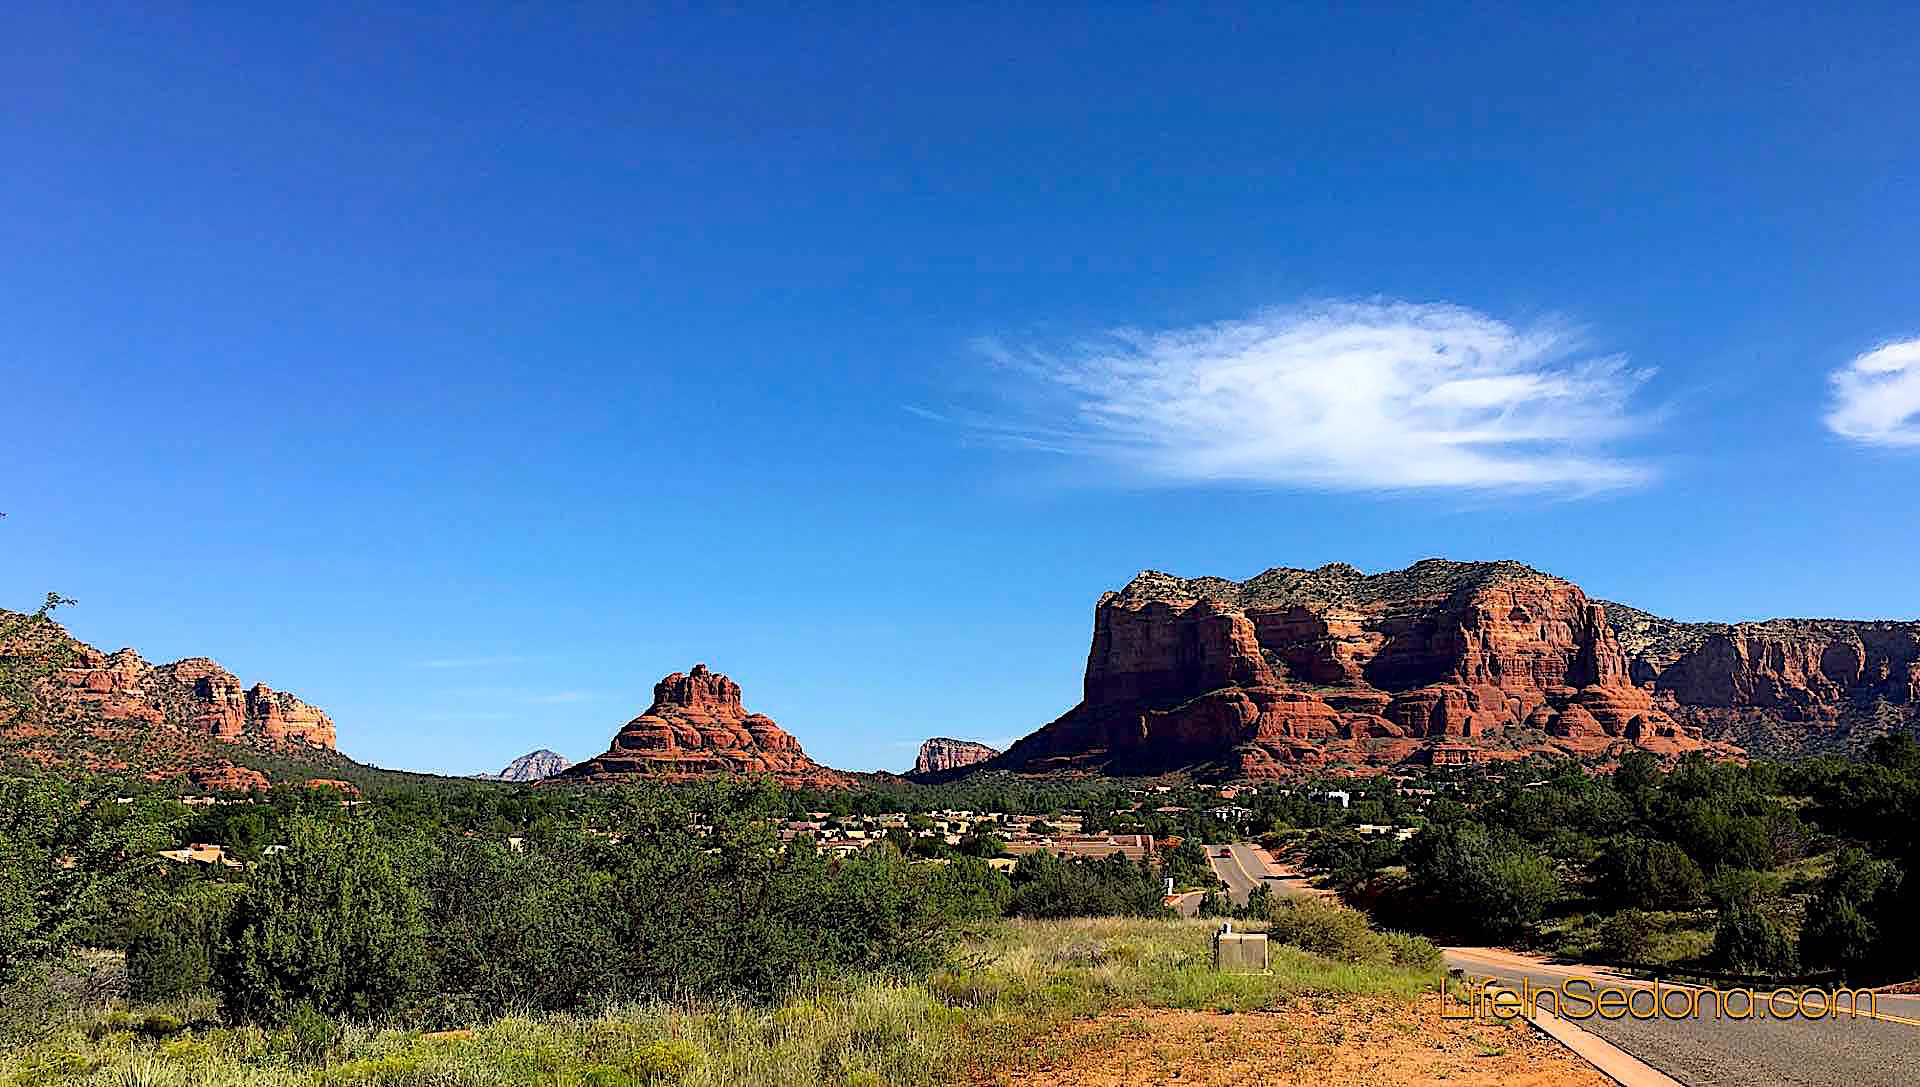 Bell Rock Courthouse Butte - SellSedona.com